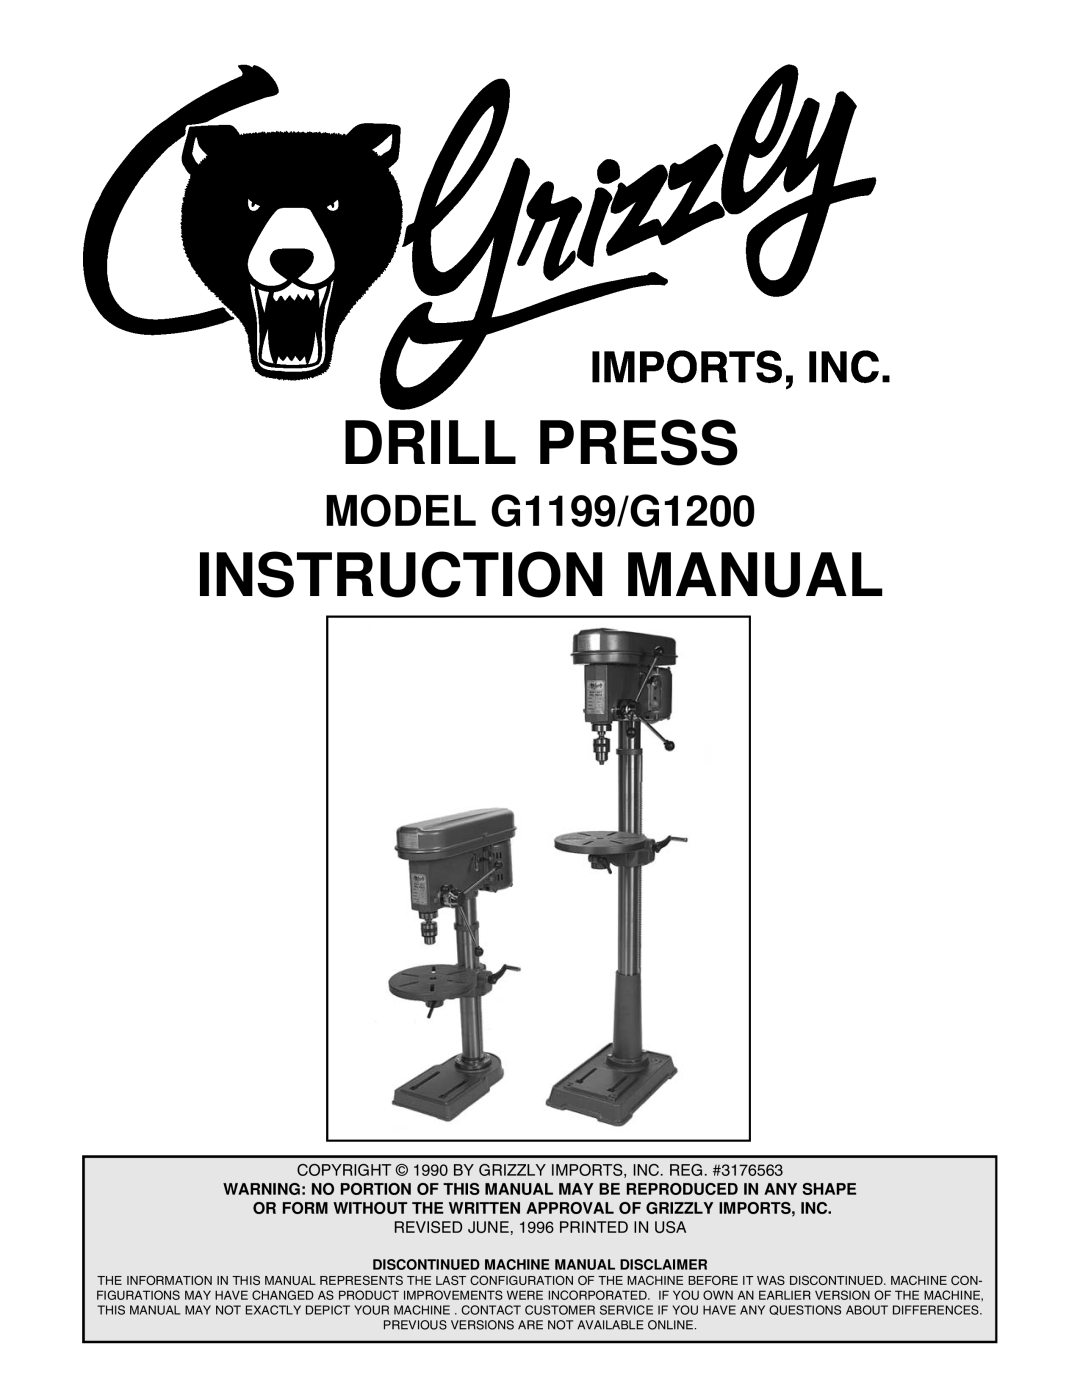 Grizzly instruction manual MODEL G1199/G1200, Drill Press, Instruction Manual, REVISED JUNE, 1996 PRINTED IN USA 